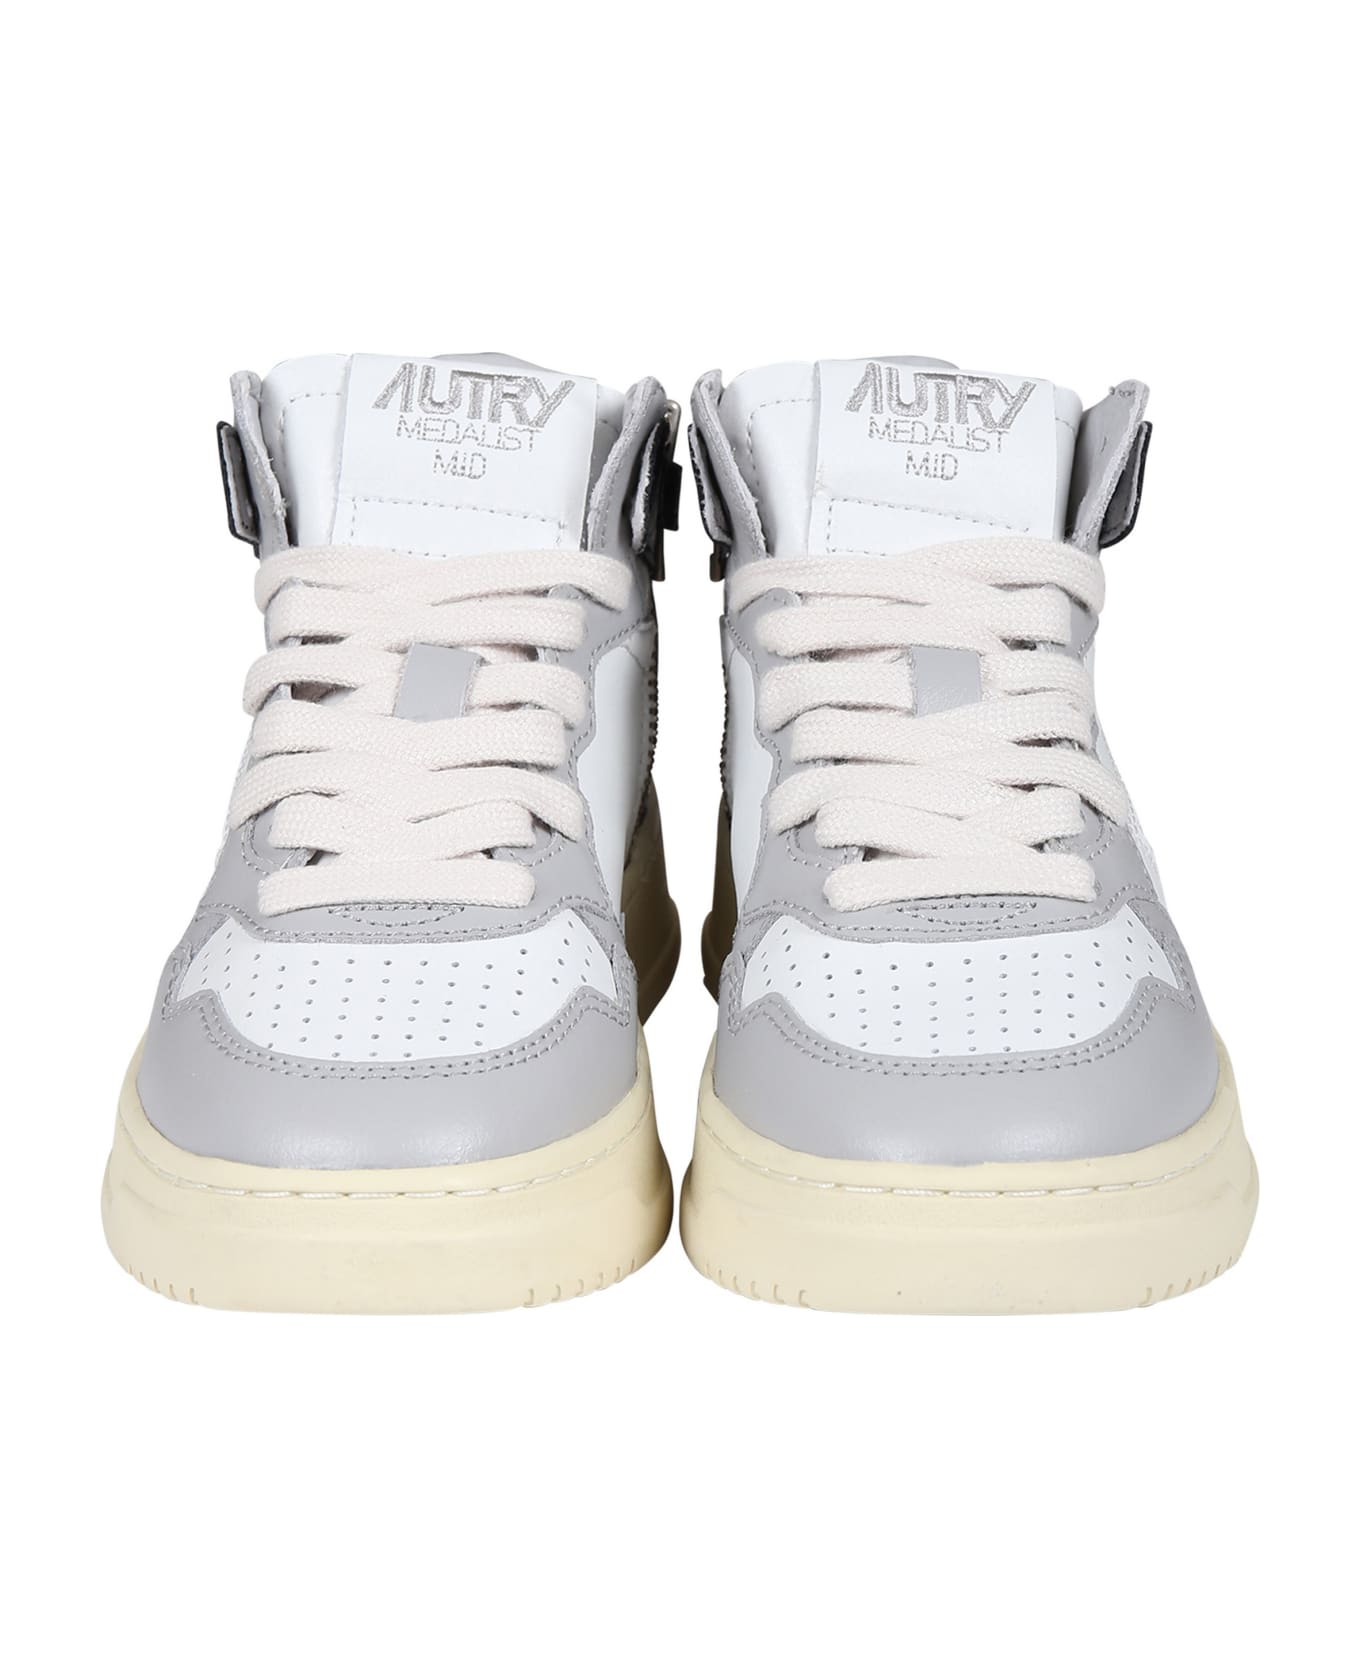 Autry Grey Sneakers For Kids With Logo - Grey シューズ